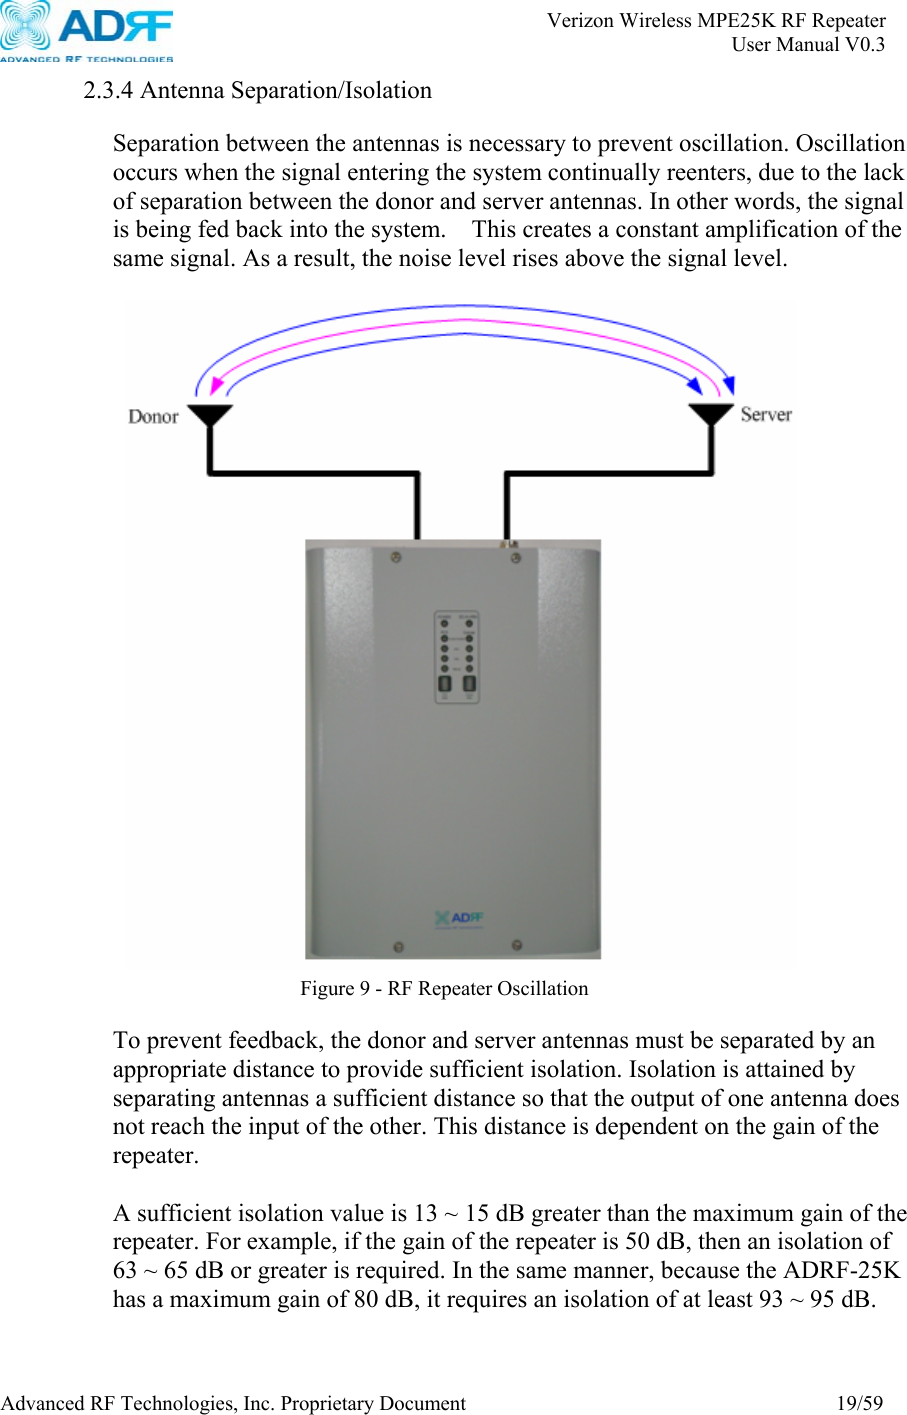       Verizon Wireless MPE25K RF Repeater   User Manual V0.3 Advanced RF Technologies, Inc. Proprietary Document  19/59  2.3.4 Antenna Separation/Isolation  Separation between the antennas is necessary to prevent oscillation. Oscillation occurs when the signal entering the system continually reenters, due to the lack of separation between the donor and server antennas. In other words, the signal is being fed back into the system.    This creates a constant amplification of the same signal. As a result, the noise level rises above the signal level.     To prevent feedback, the donor and server antennas must be separated by an appropriate distance to provide sufficient isolation. Isolation is attained by separating antennas a sufficient distance so that the output of one antenna does not reach the input of the other. This distance is dependent on the gain of the repeater.   A sufficient isolation value is 13 ~ 15 dB greater than the maximum gain of the repeater. For example, if the gain of the repeater is 50 dB, then an isolation of 63 ~ 65 dB or greater is required. In the same manner, because the ADRF-25K has a maximum gain of 80 dB, it requires an isolation of at least 93 ~ 95 dB.  Figure 9 - RF Repeater Oscillation 